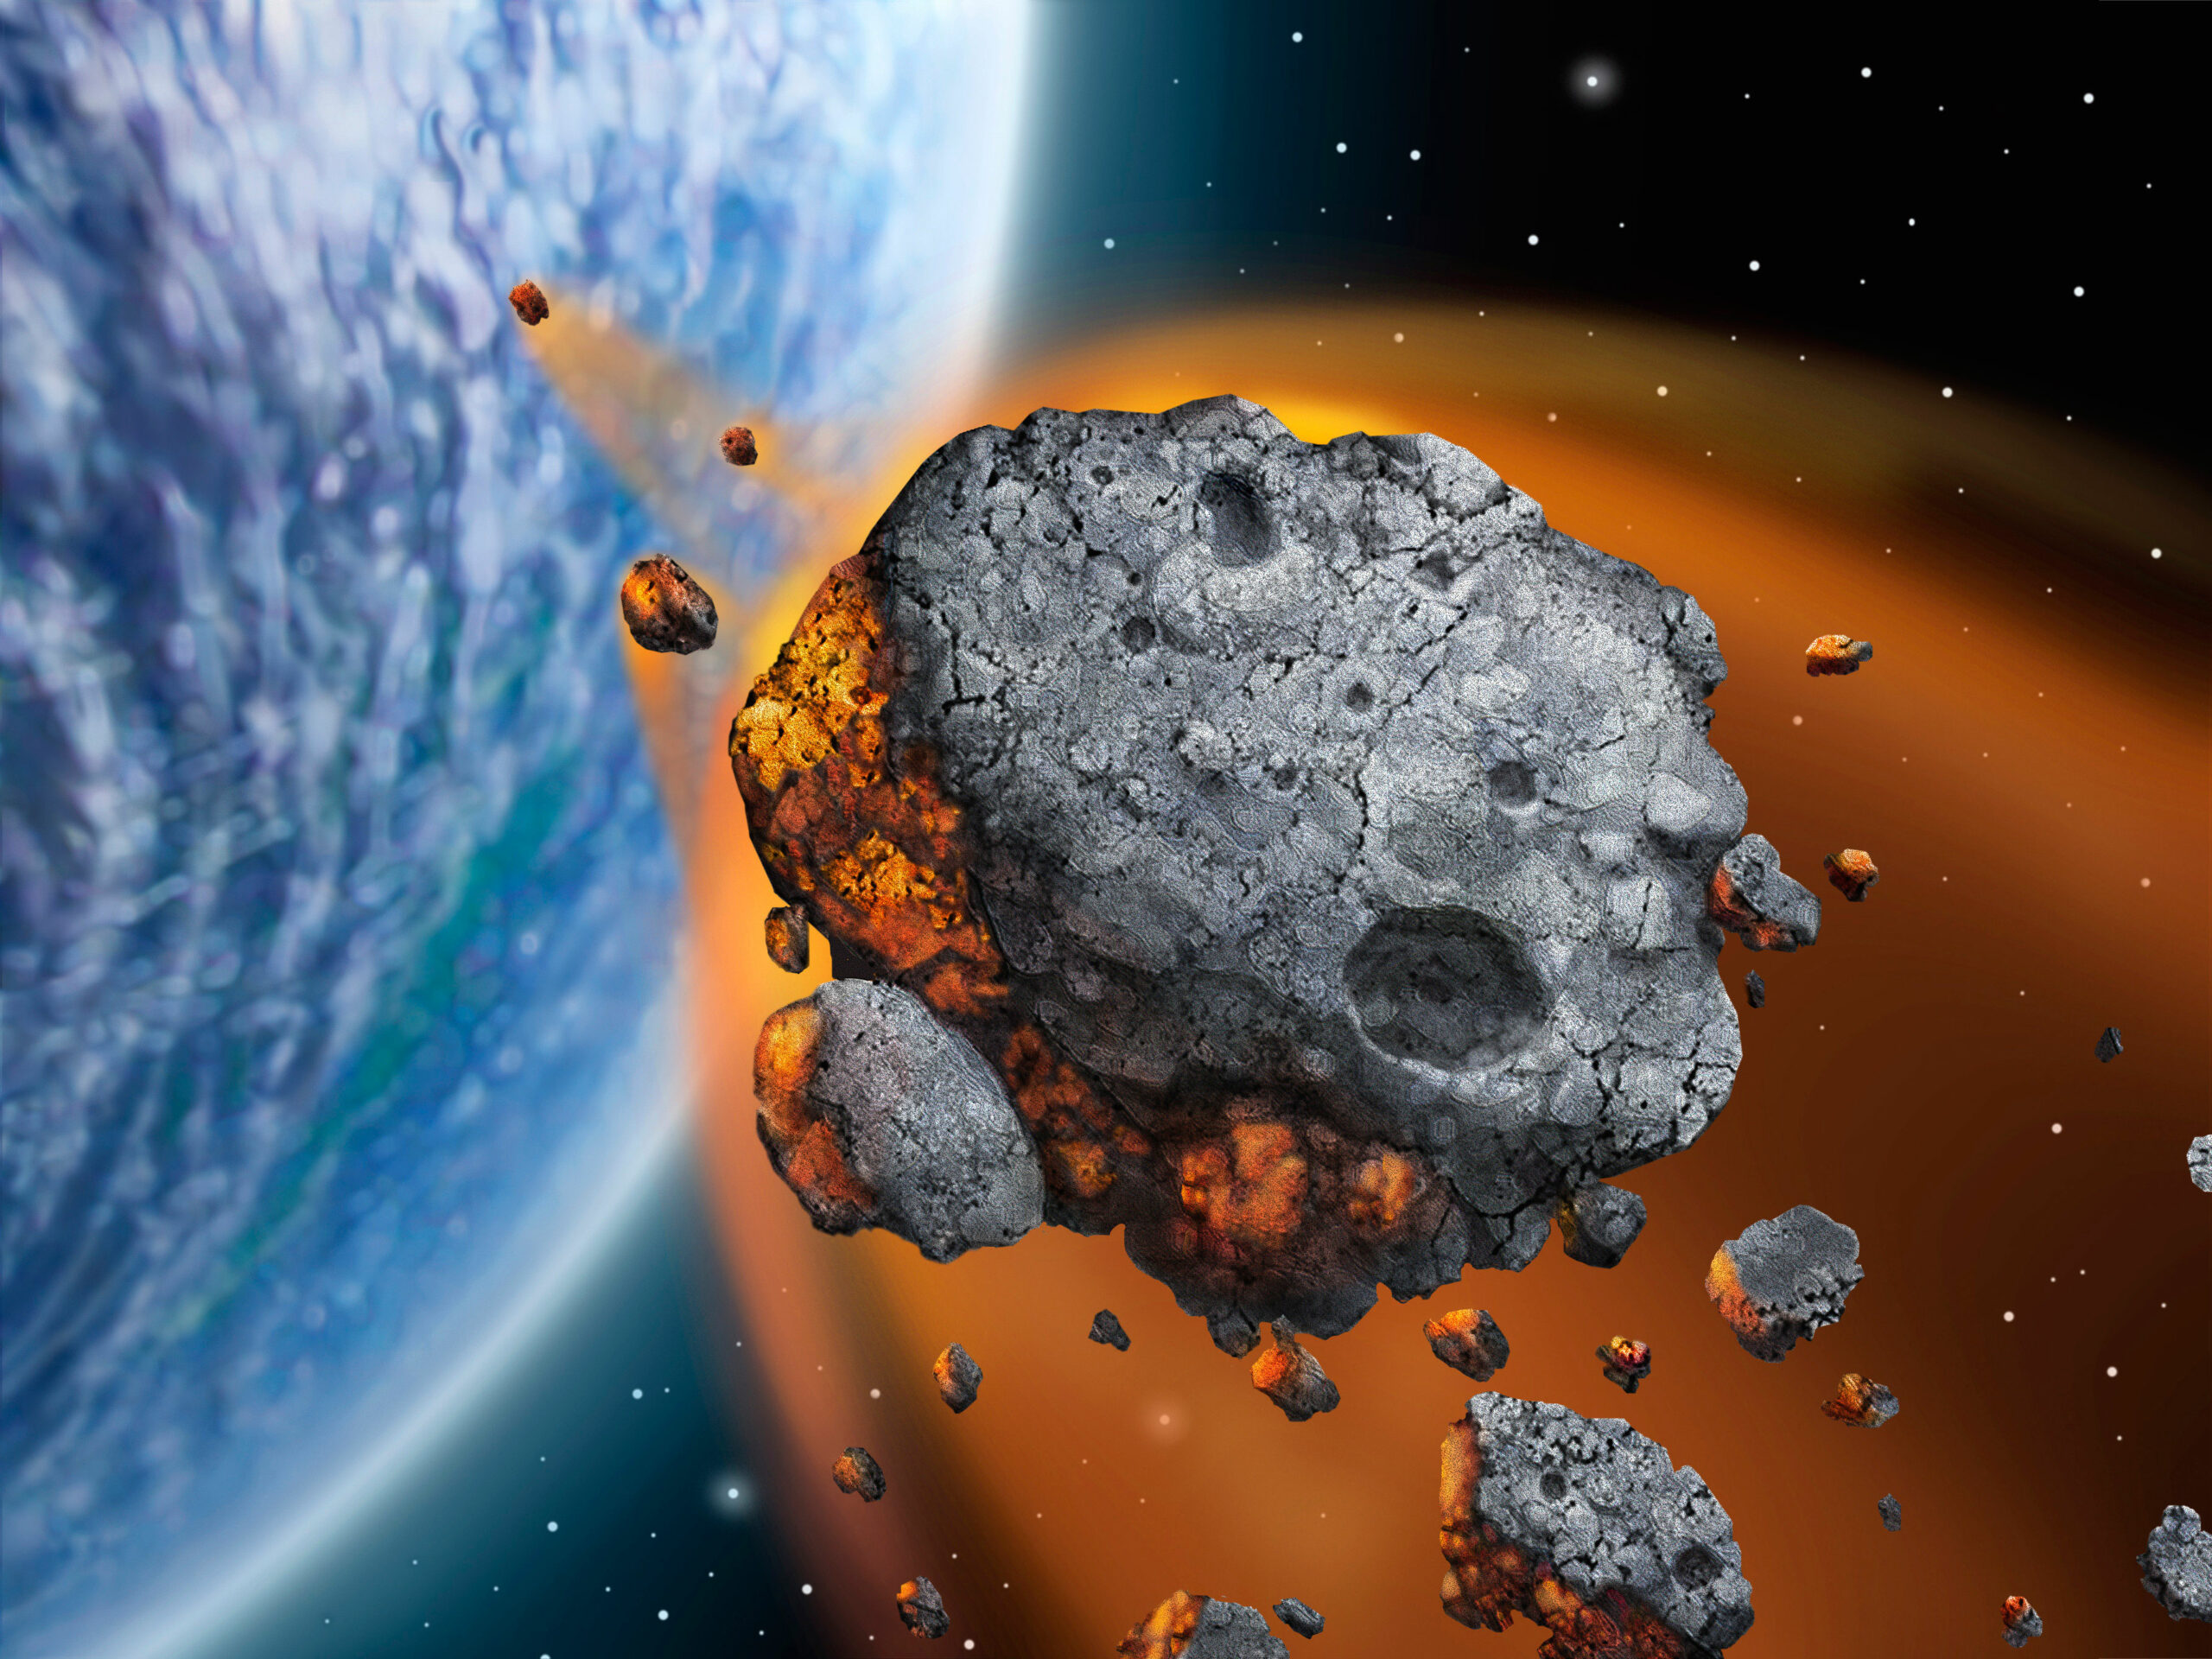 What’s The Best Way To Protect Earth From Incoming Asteroids?